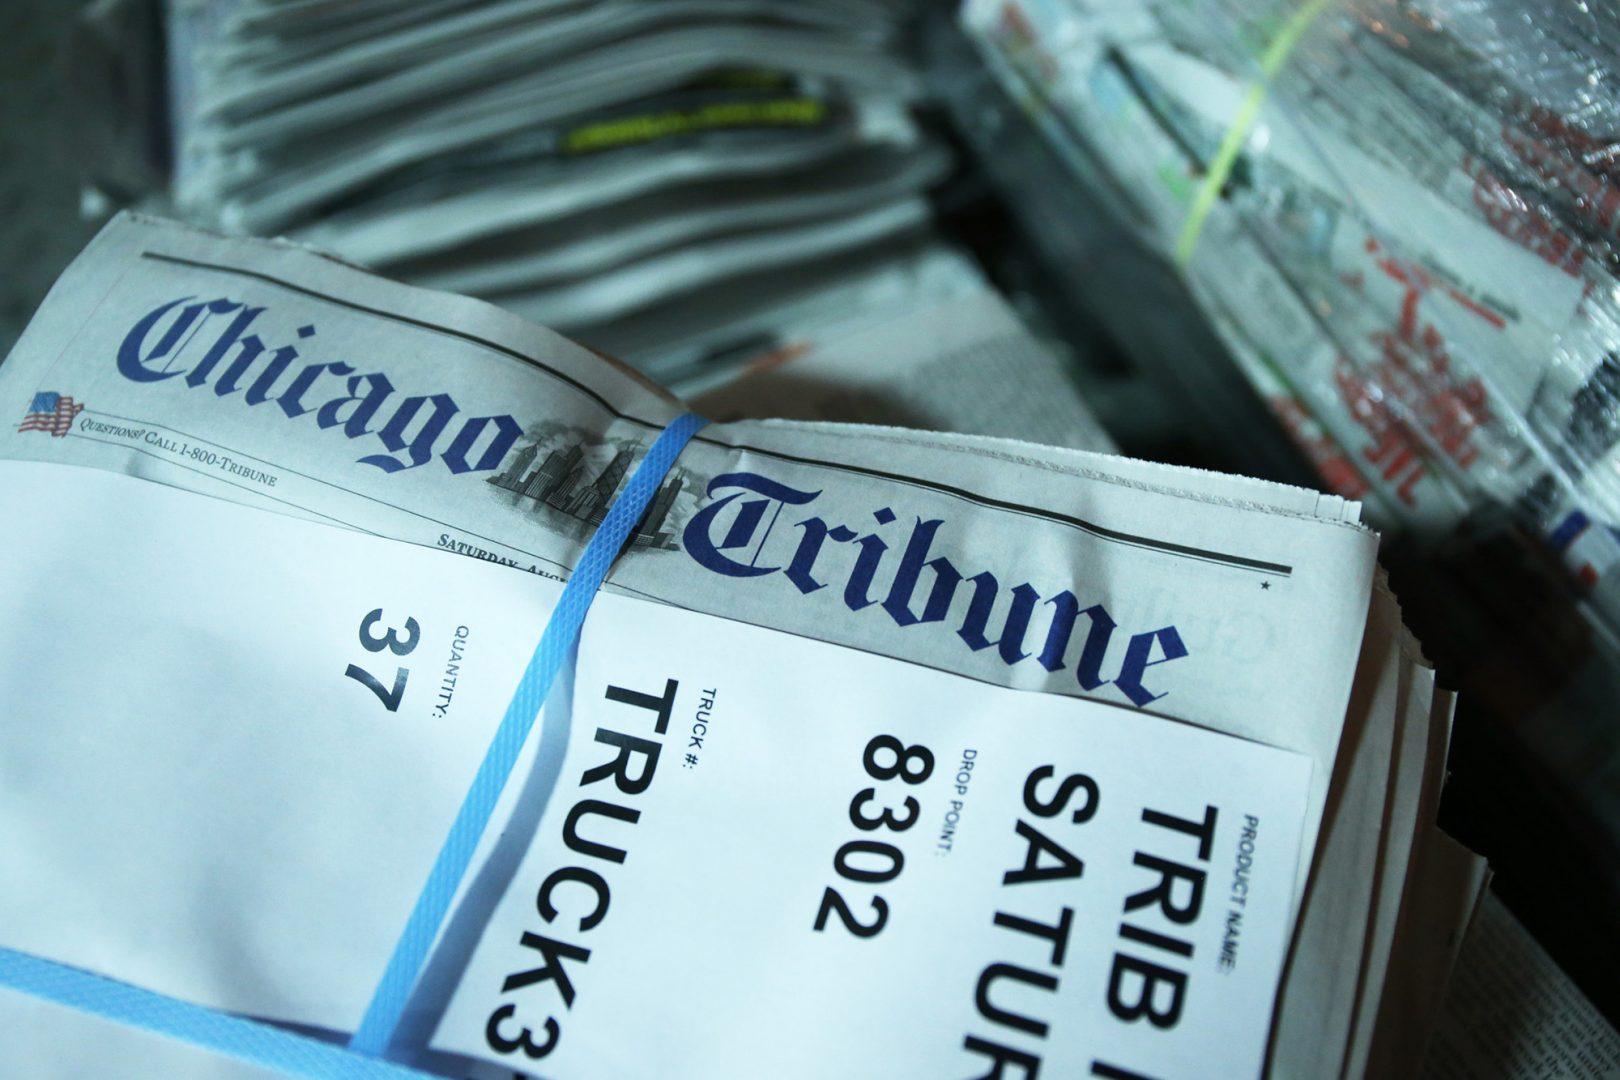 Bundles+of+Chicago+Tribune+Saturday+editions+are+stacked+for+delivery+at+the+Freedom+Center.+%28John+J.+Kim%2FChicago+Tribune%2FTNS%29